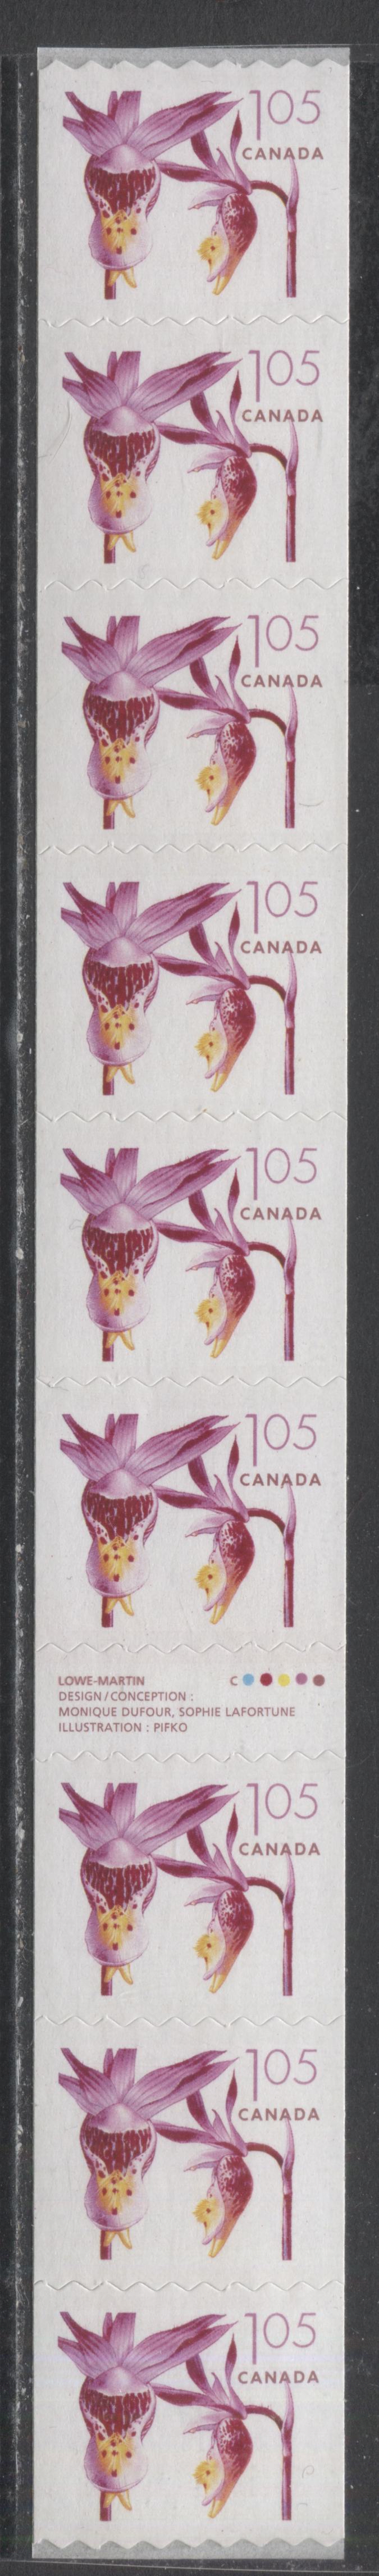 Lot 48 Canada #2130iv $1.05 Multicolored Pink Fairy Slipper, 2005-2006 Flower Definitives (2) - Coils, A VFNH Gutter Strip Of 9 With Compound Die Cut Between Stamps 2 & 3. DF TRC Paper, Considerable Ghost Tagging Bars Throughout Strip $260